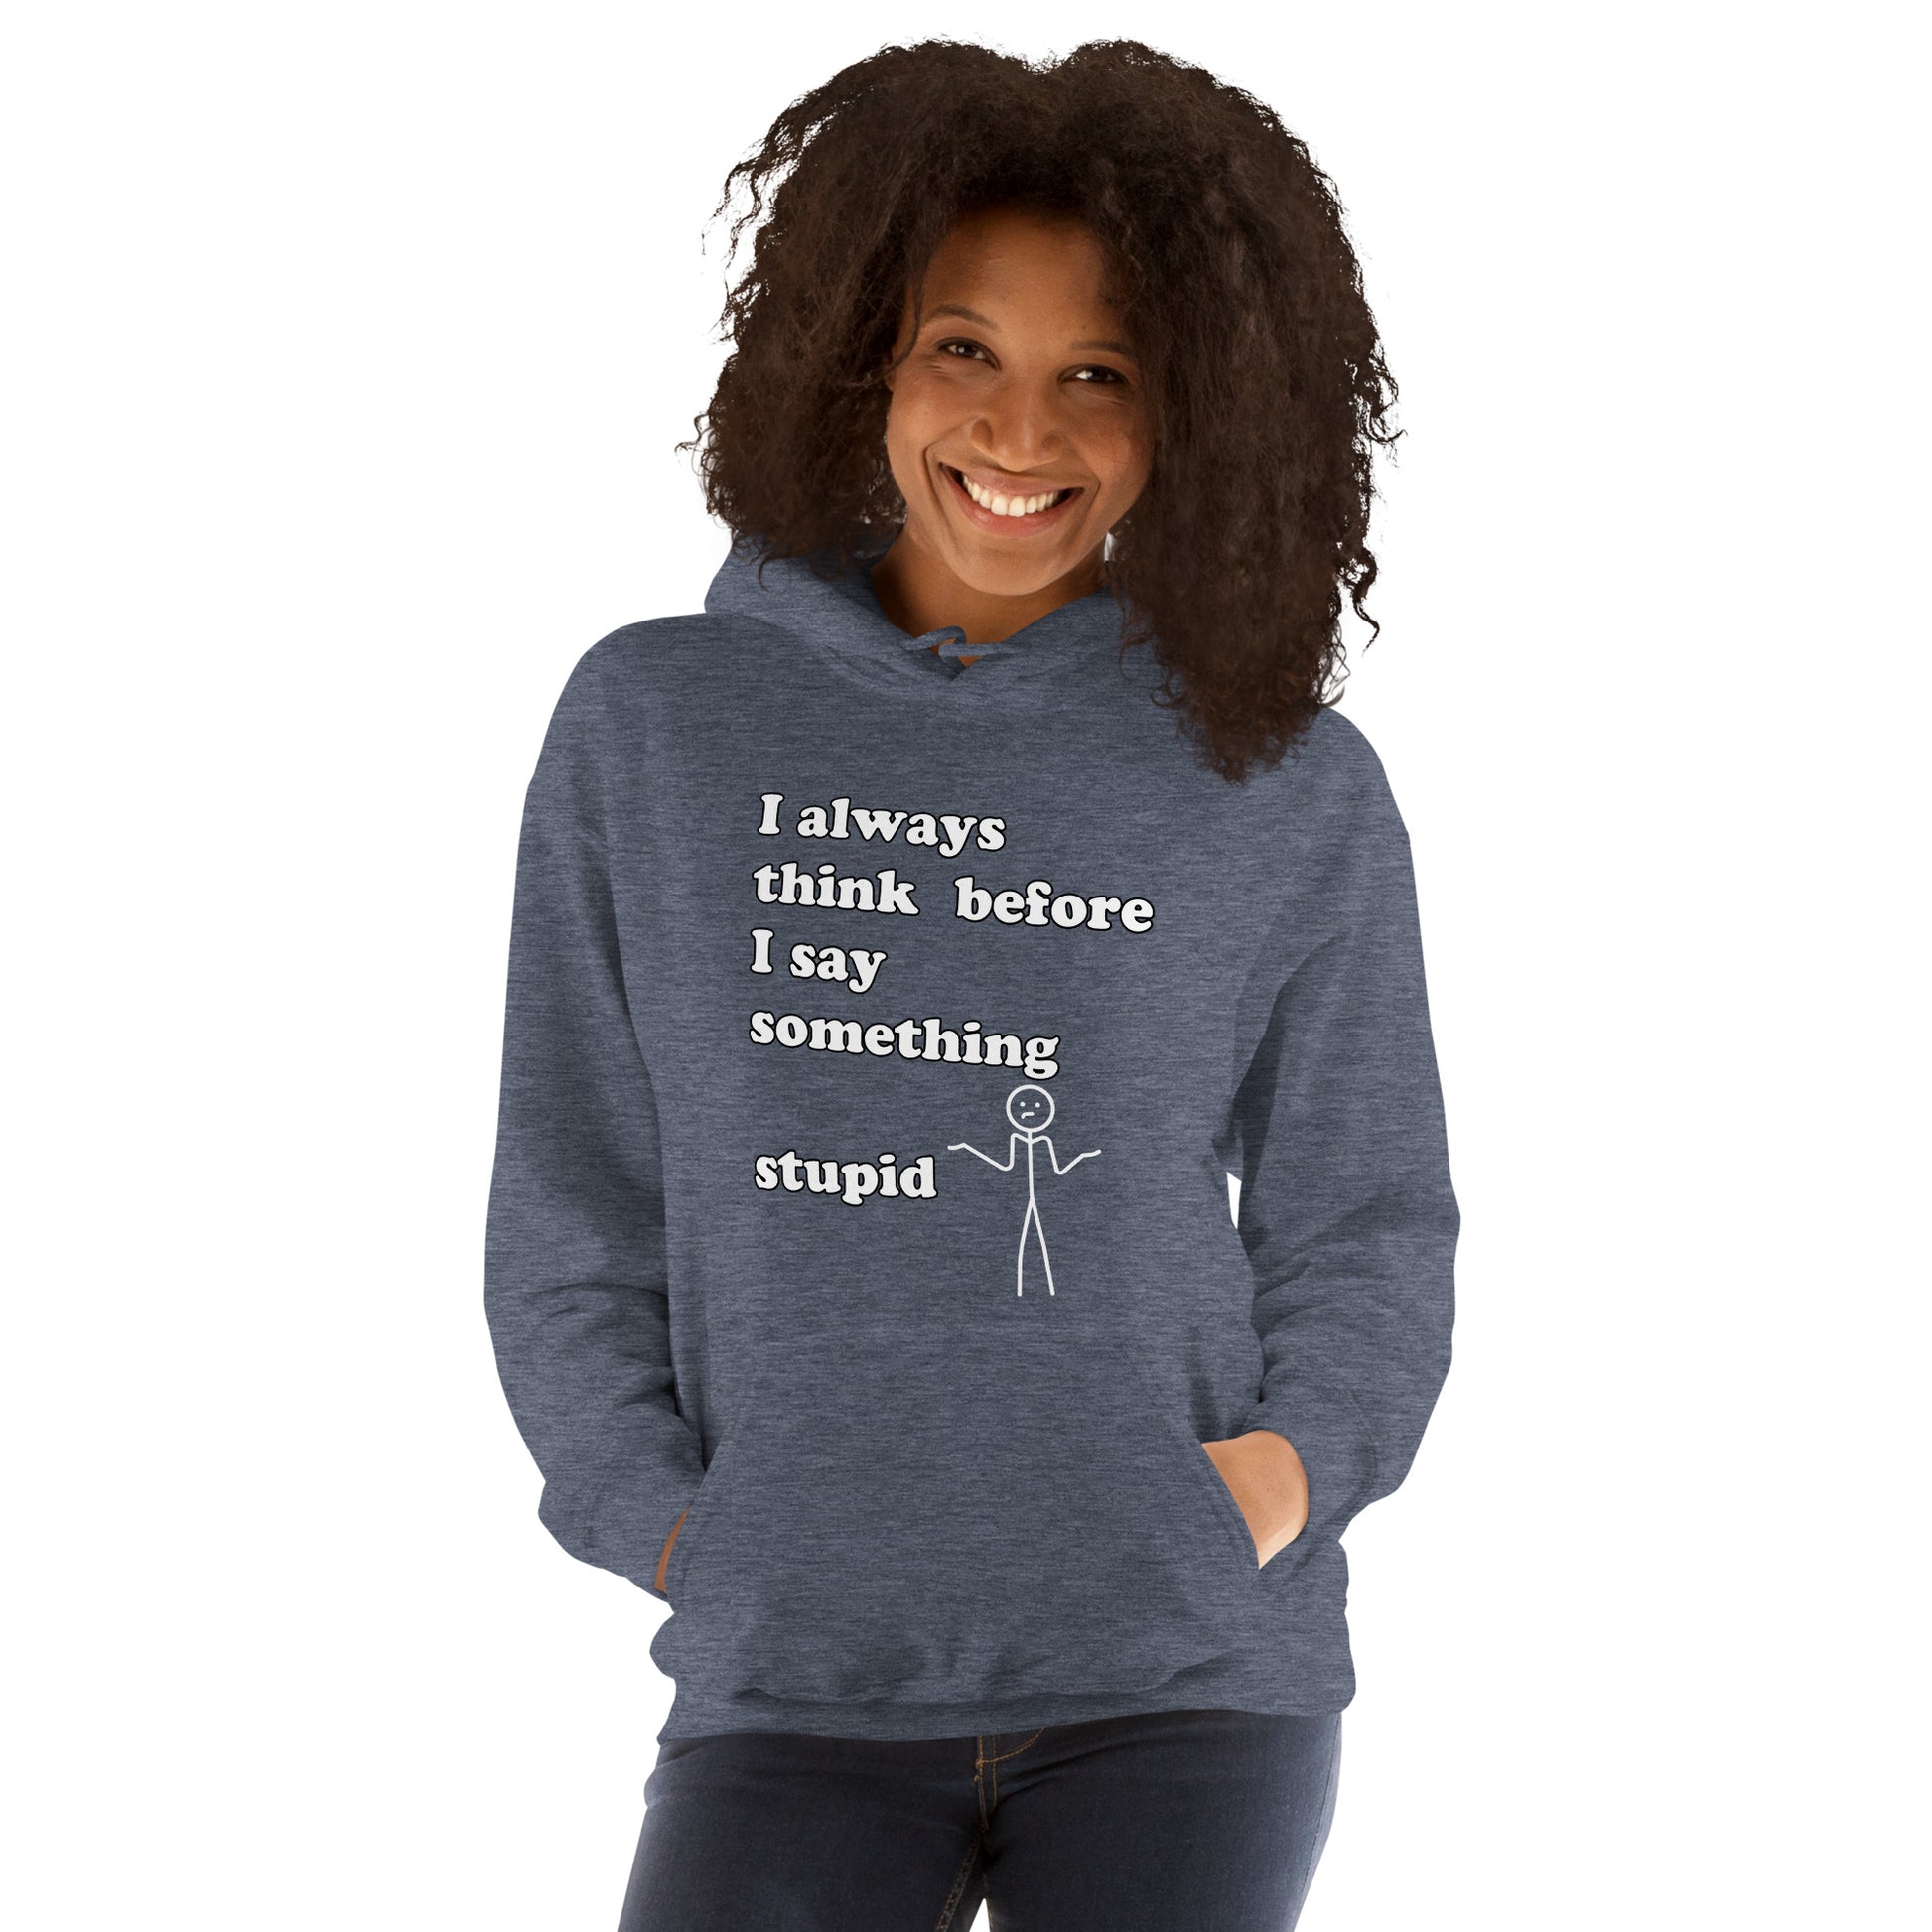 Woman with dark navy blue hoodie with text "I always think before I say something stupid"